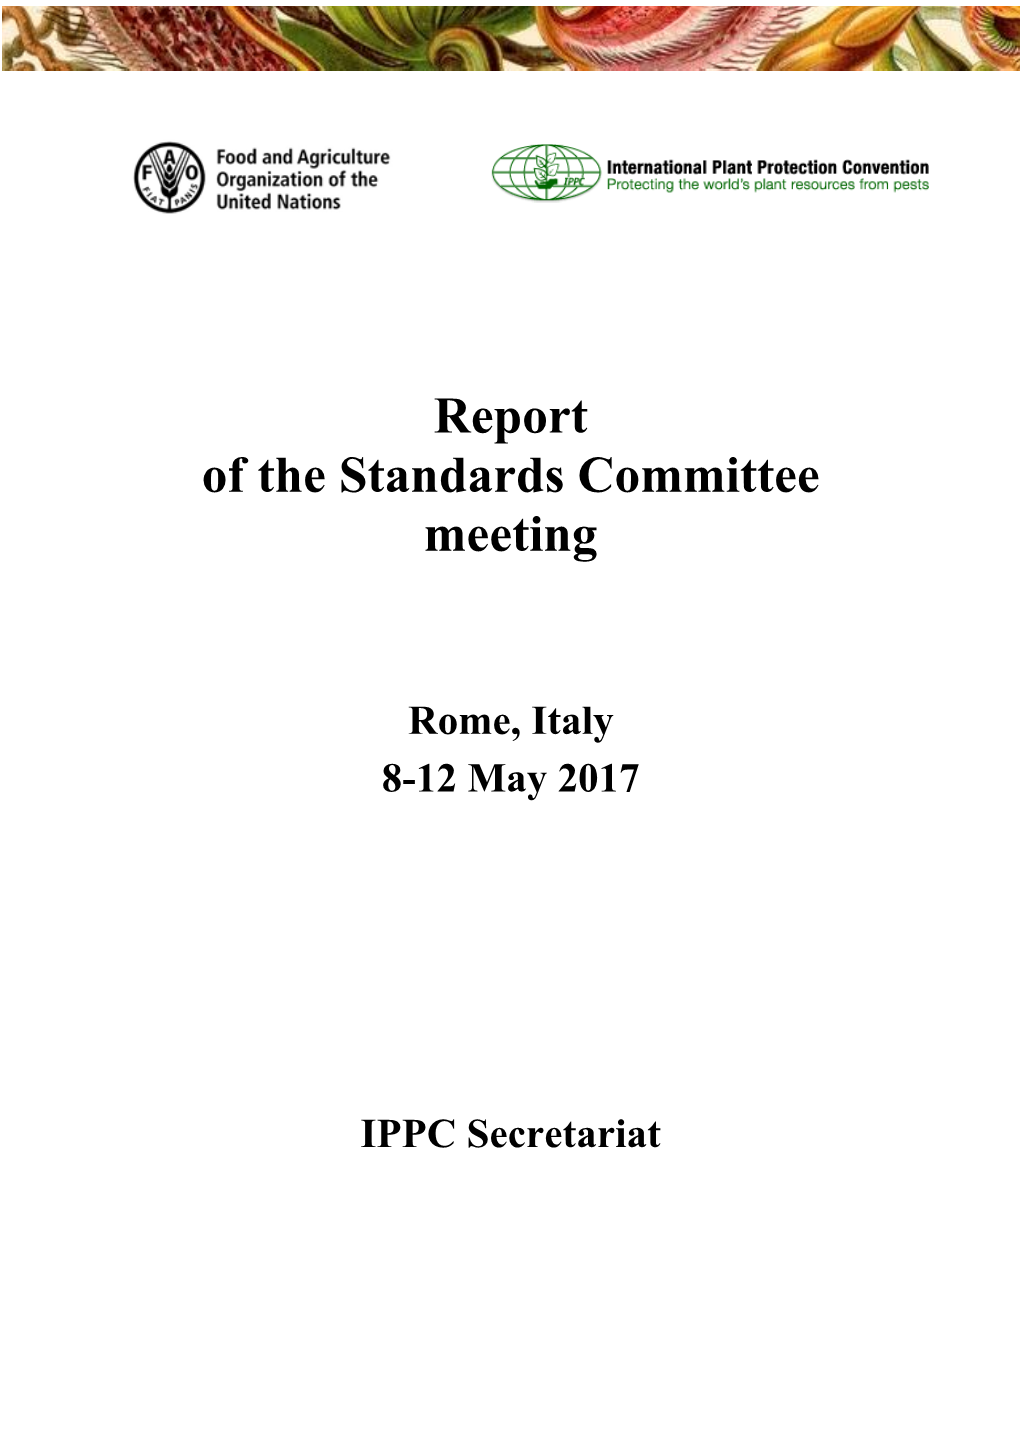 Report of the Standards Committee Meeting